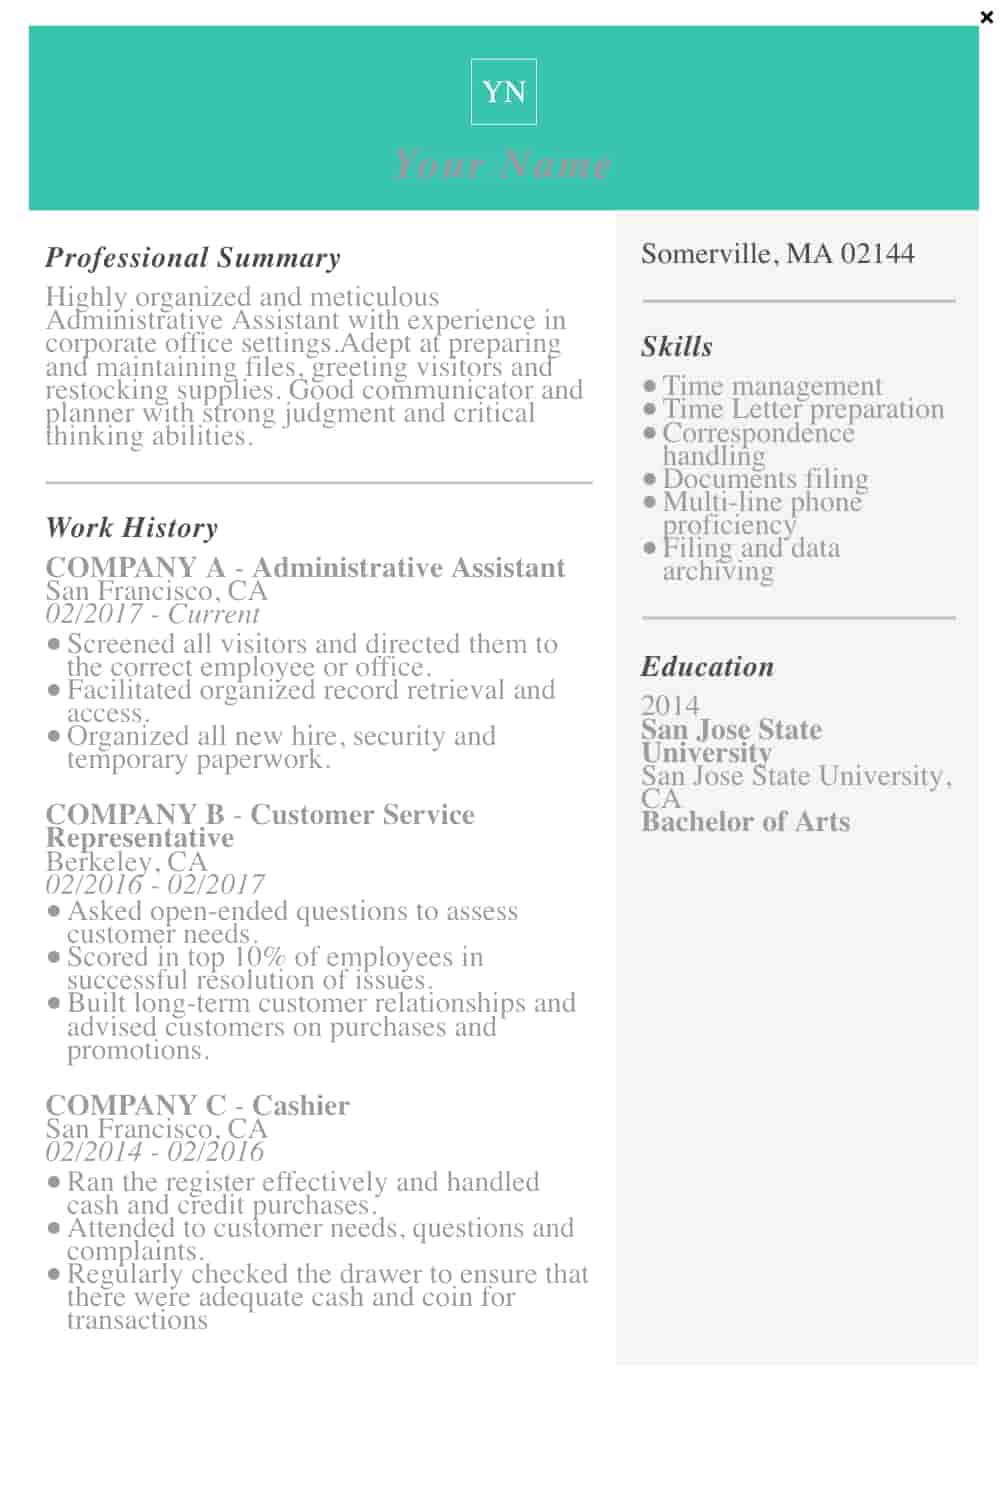 21 Free Resume Templates for Microsoft Word (& How to Make Your Own) With How To Find A Resume Template On Word